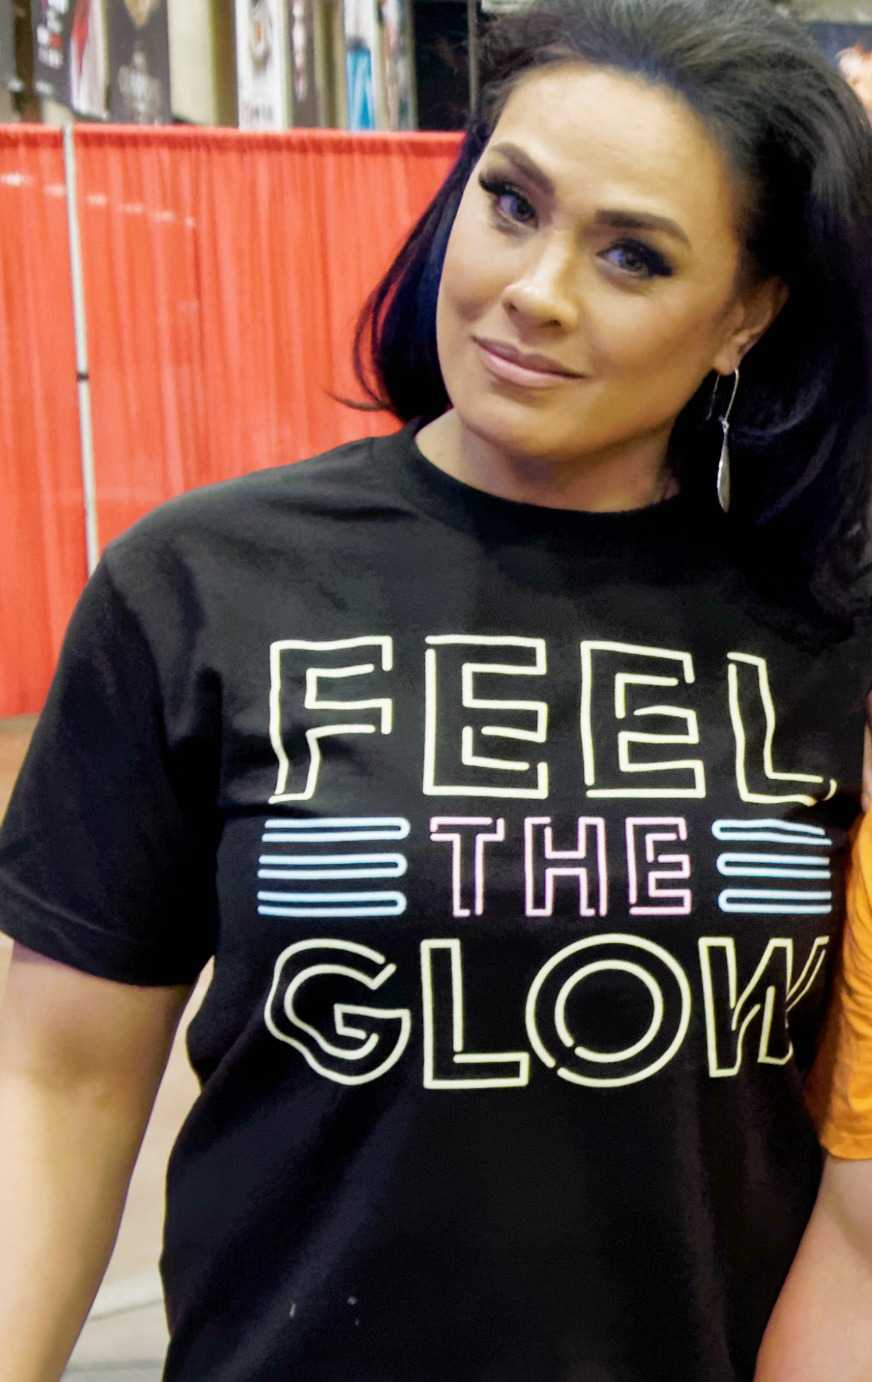 55+ Sexy Tamina Snuka Boobs Pictures That Are Essentially Perfect | Best Of Comic Books